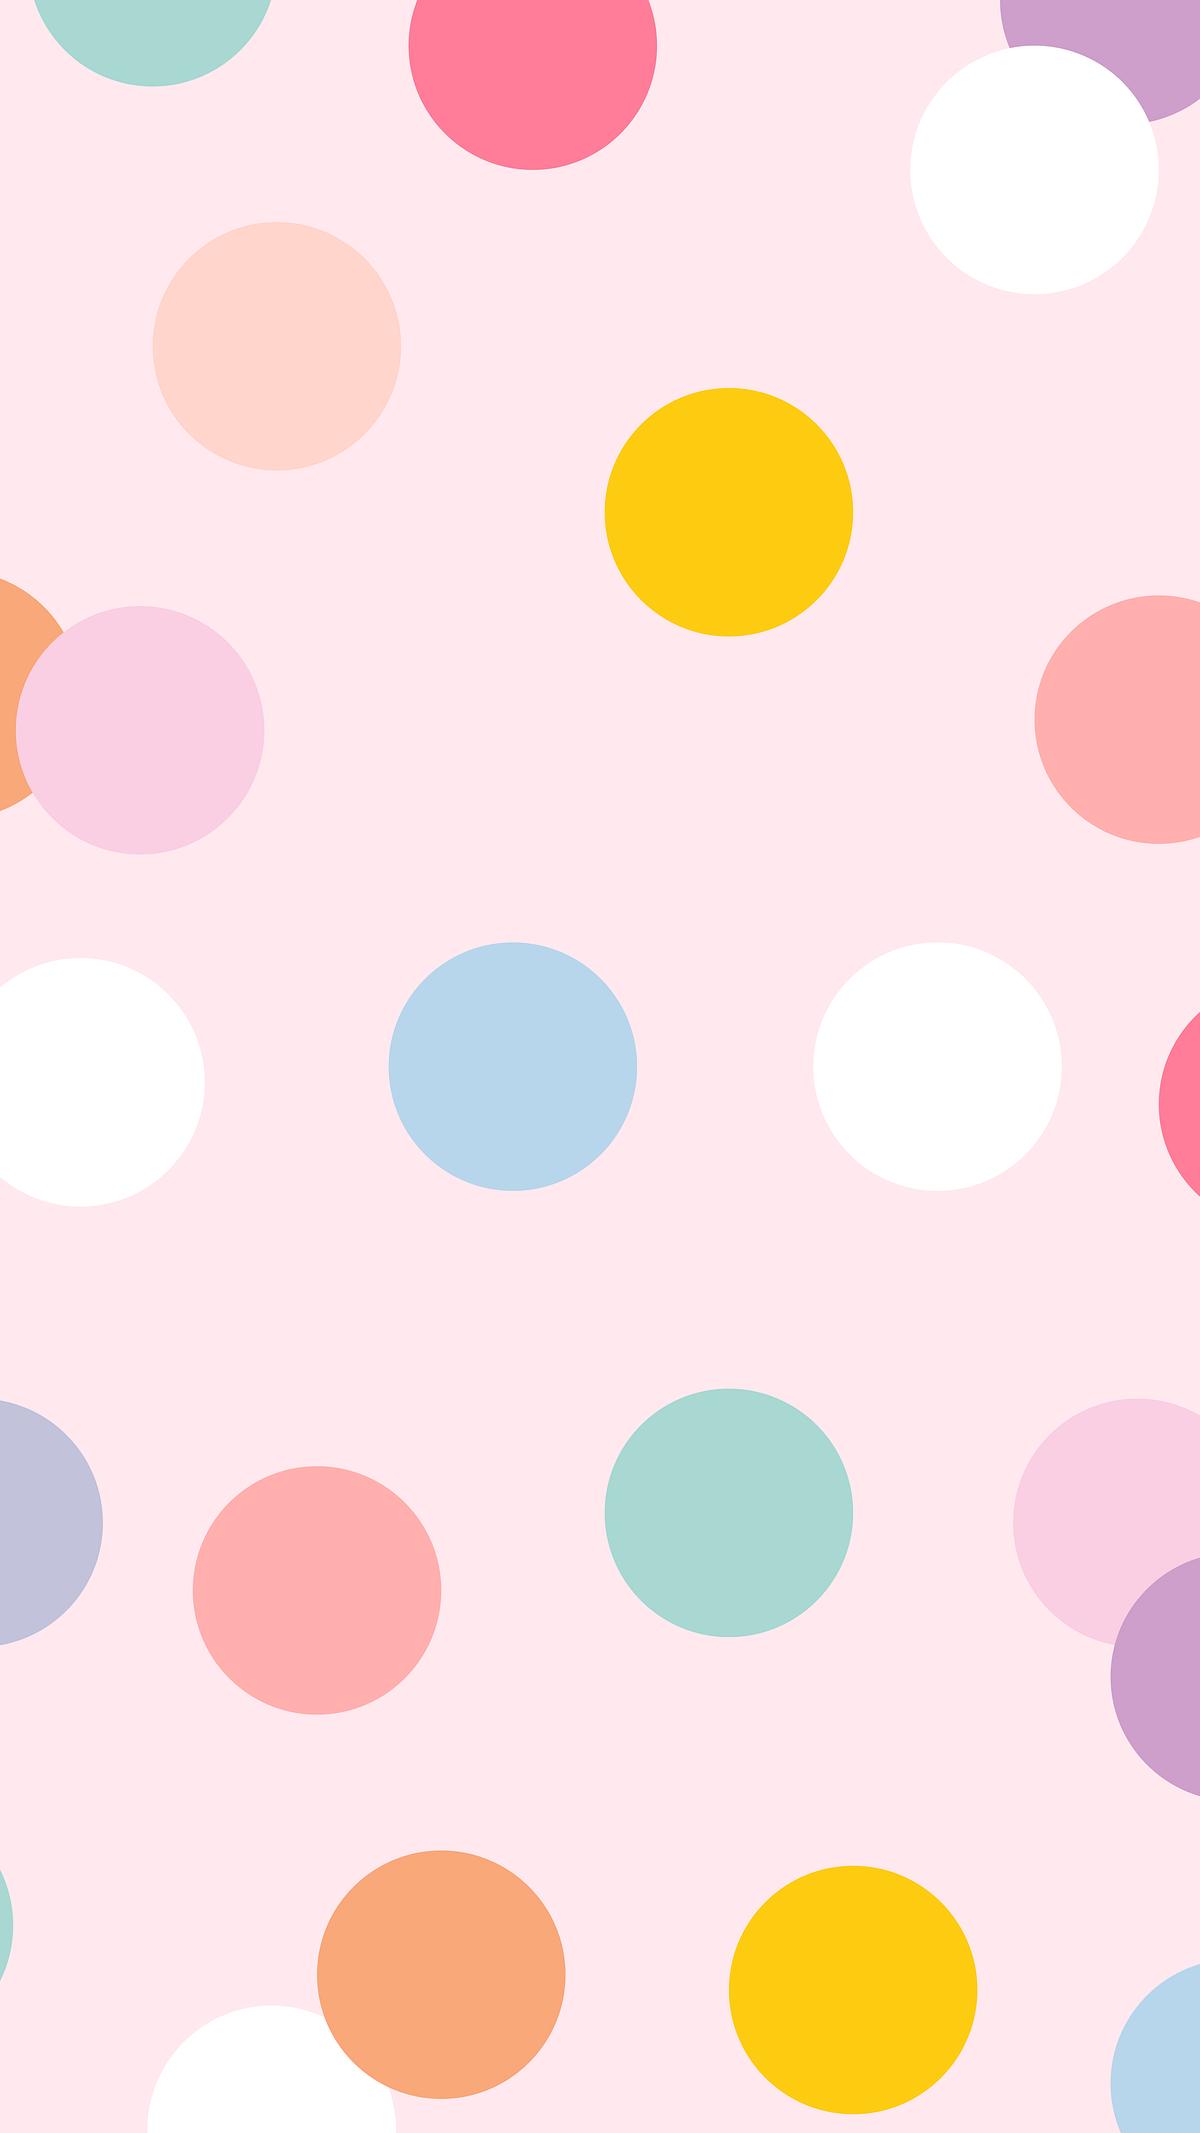 Cute mobile wallpaper psd with polka | Free PSD - rawpixel